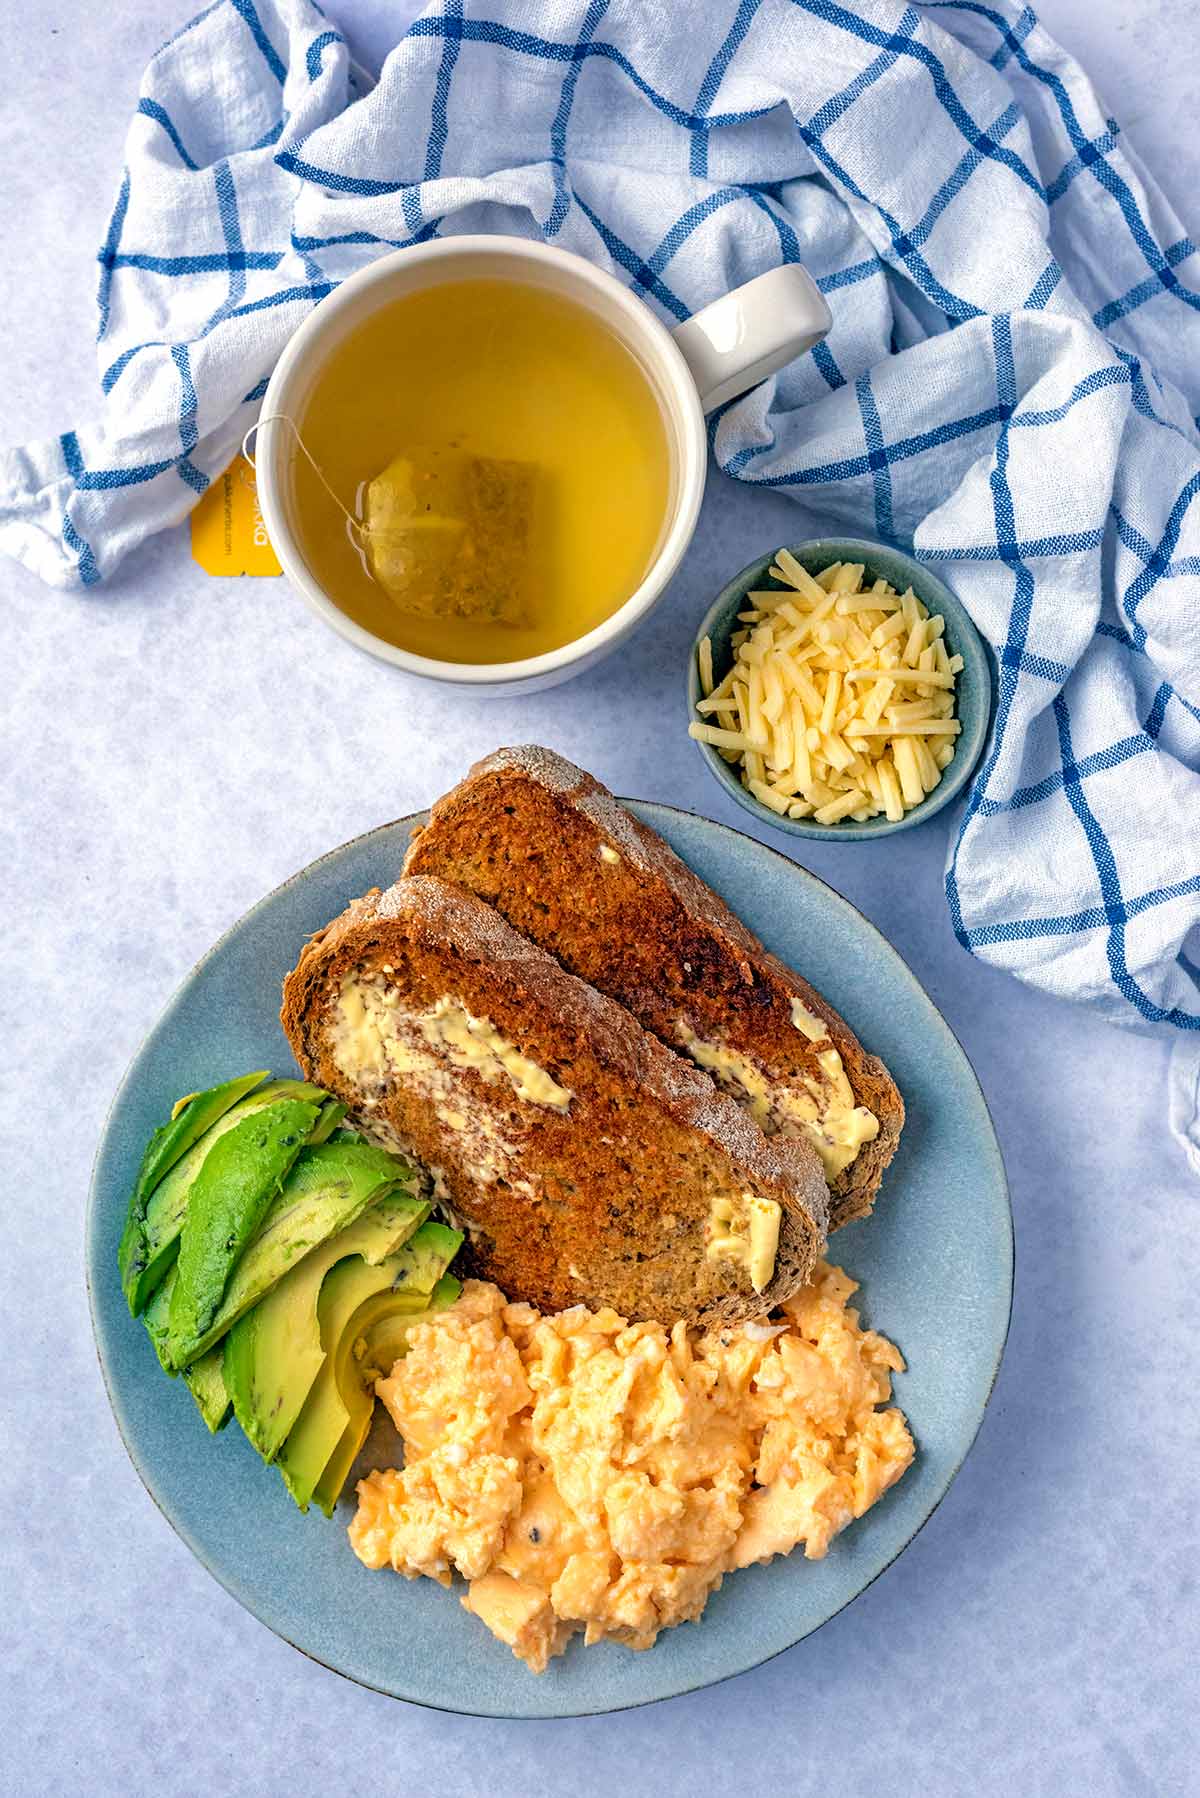 A plate of scrambled eggs, sliced avocado and toast next to a cup of tea.